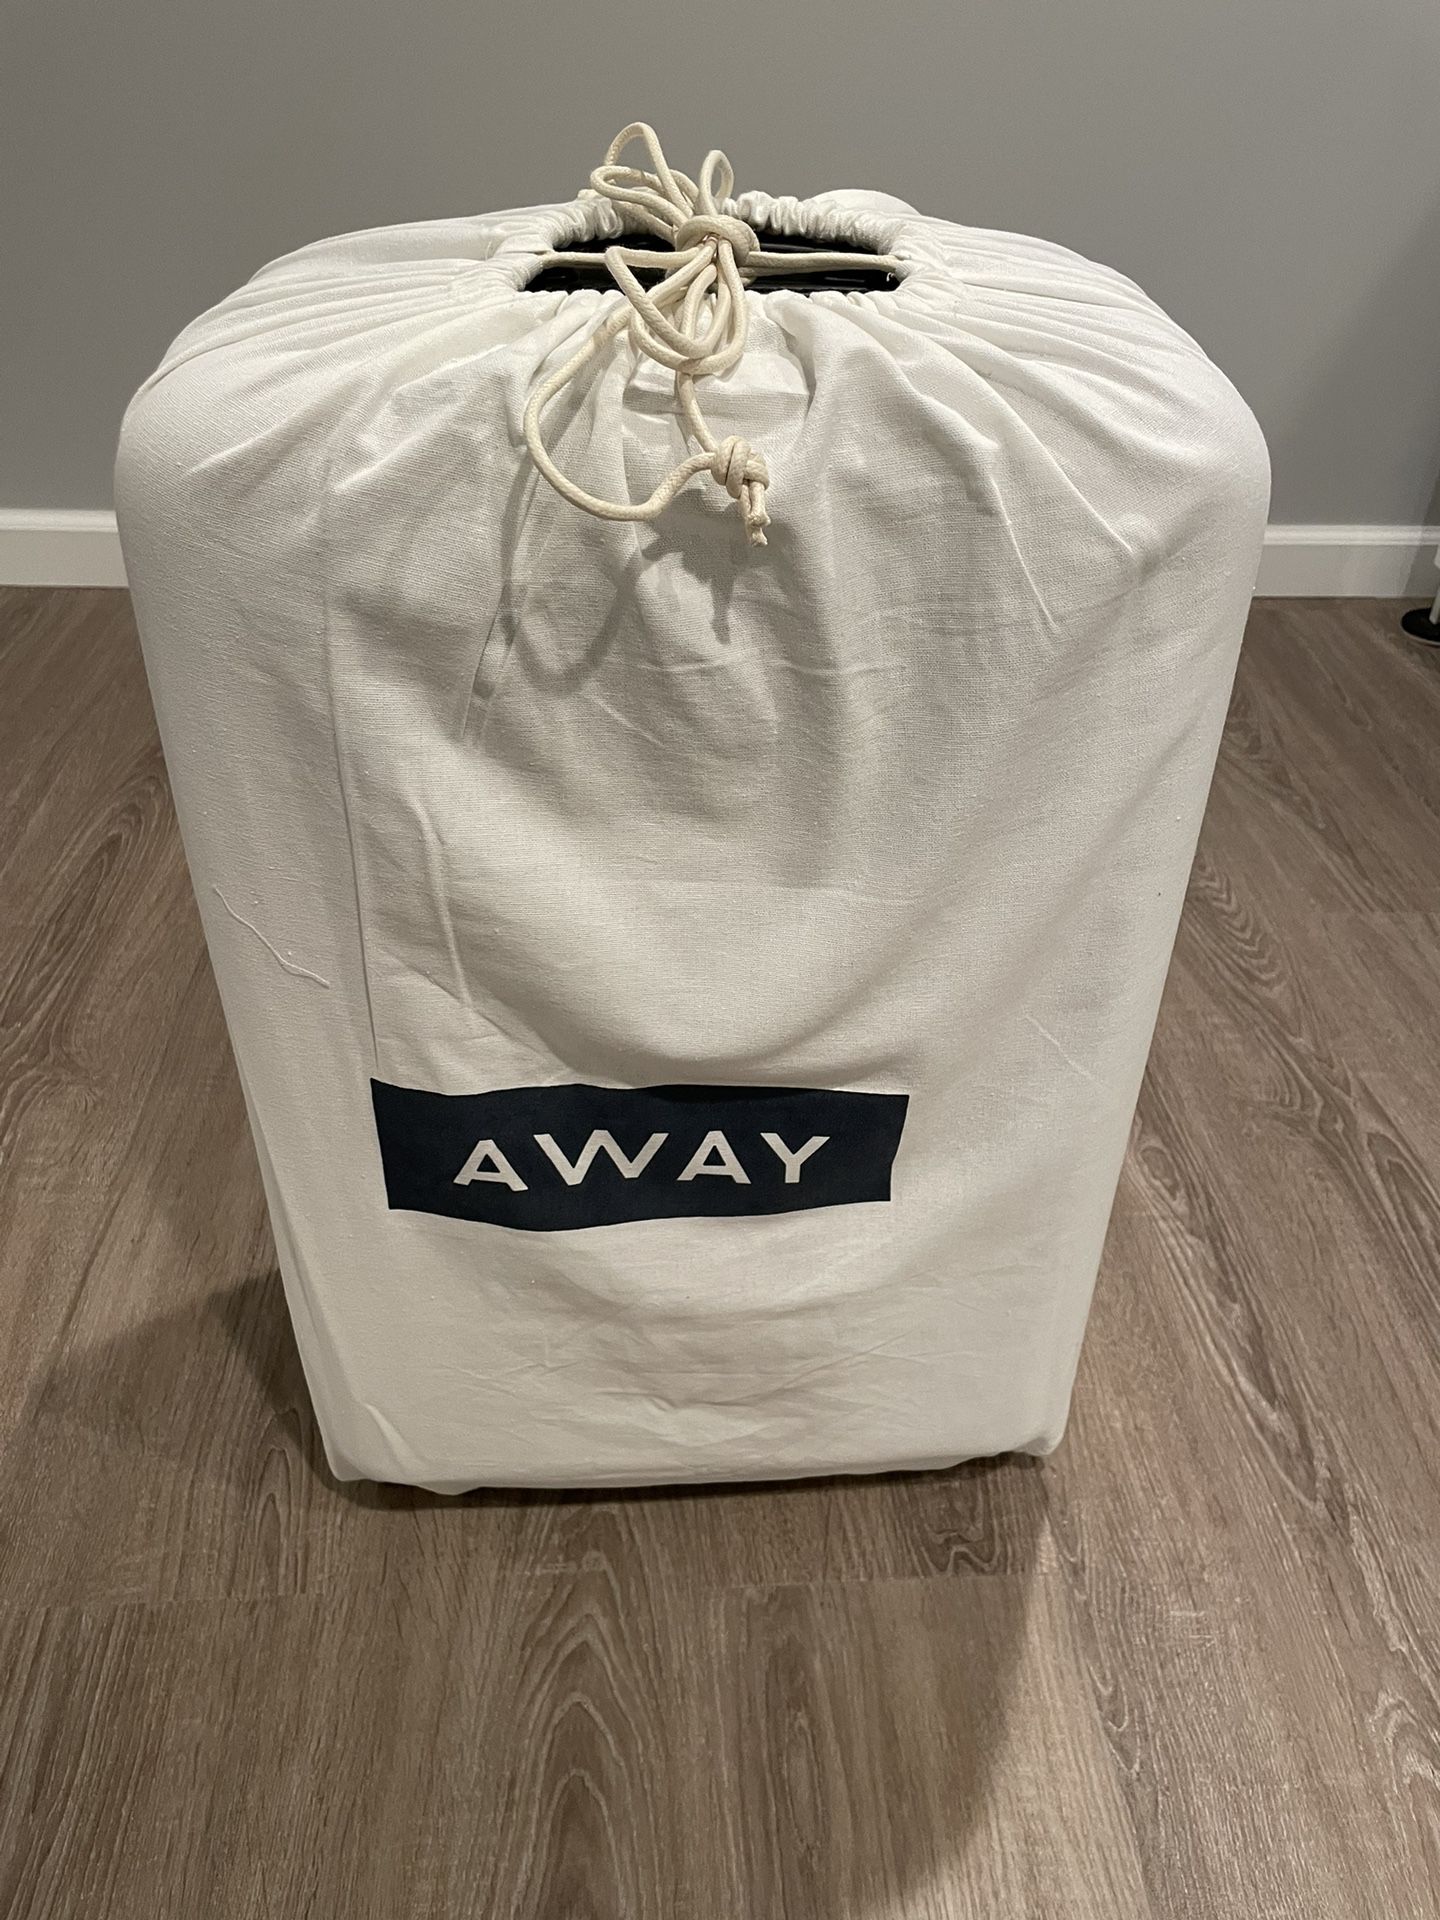 Navy Bigger Carry On Away Luggage With Charger for Sale in Brooklyn, NY -  OfferUp